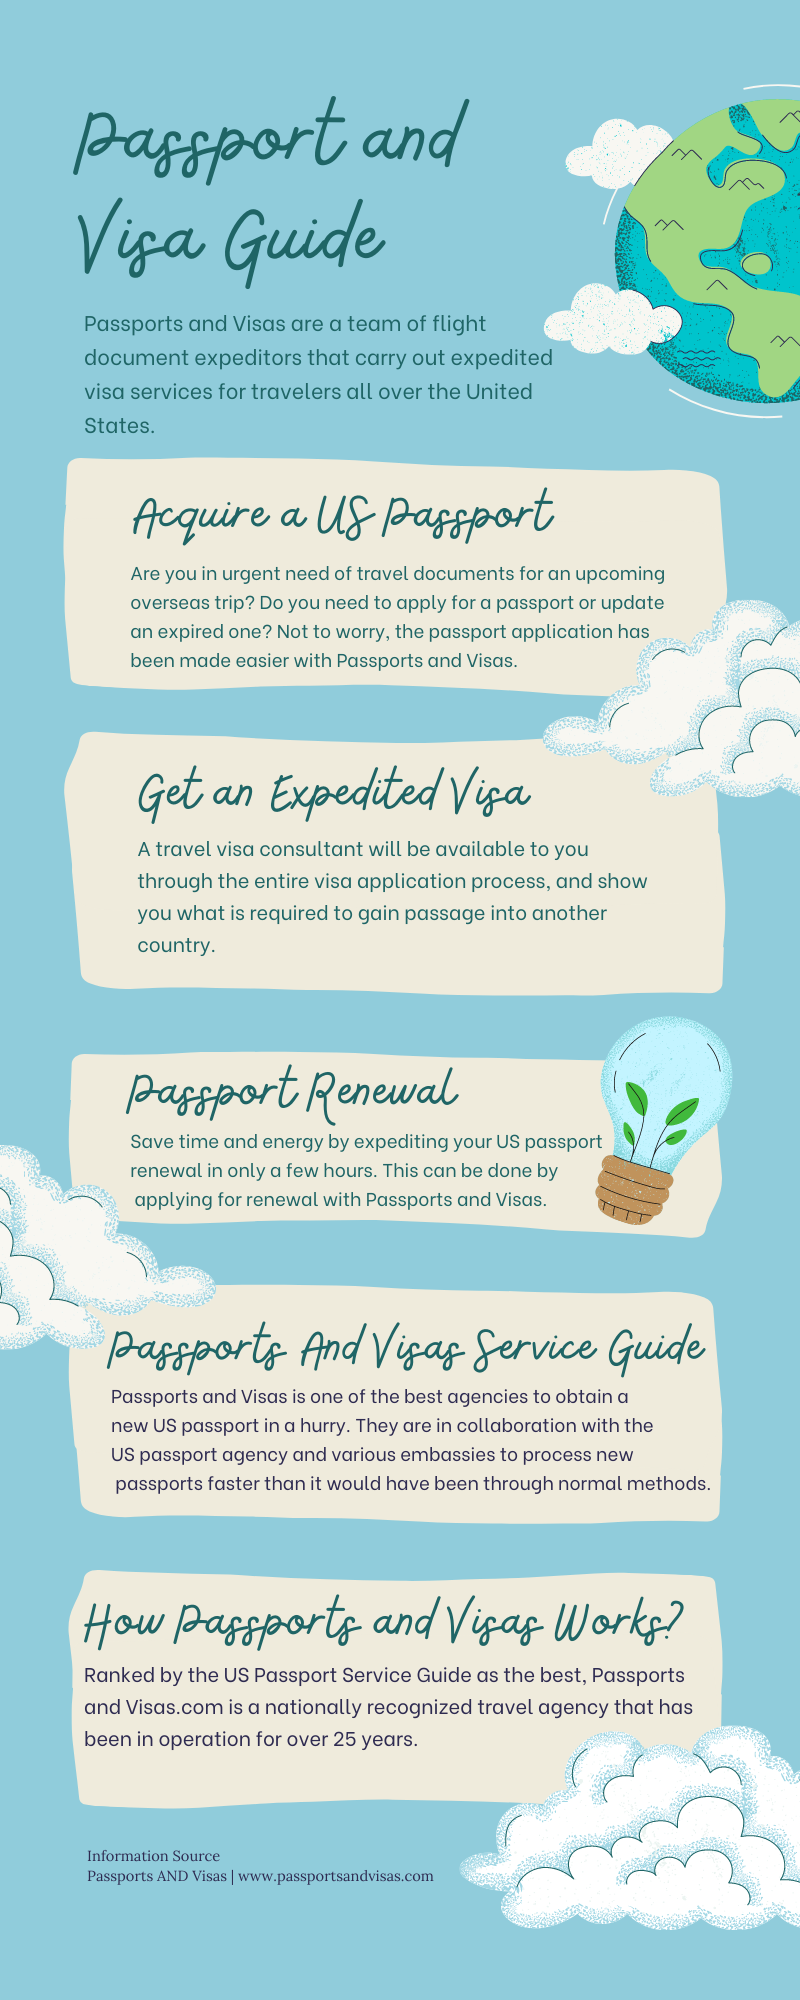 Passports AND Visas Guide